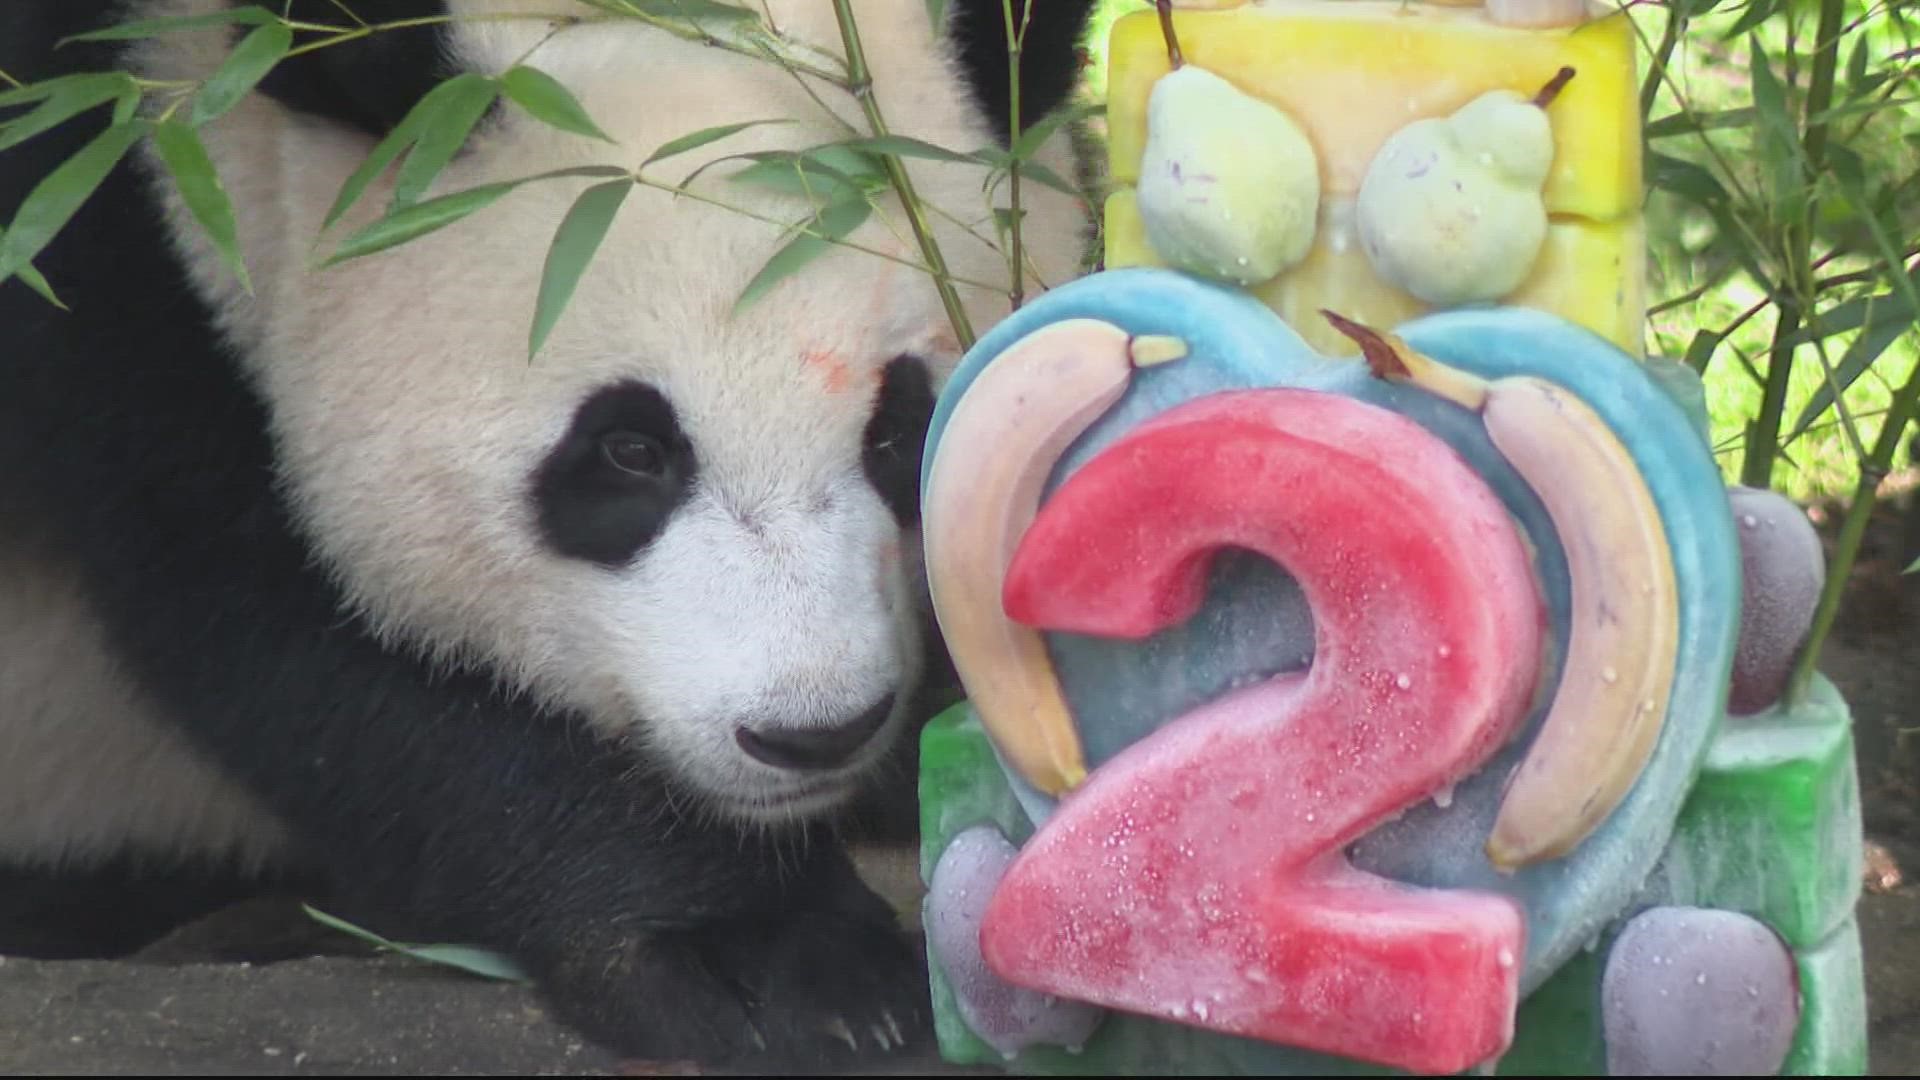 Happy birthday to cub Xiao Qi Ji, who celebrated his second birthday at DC's National Zoo